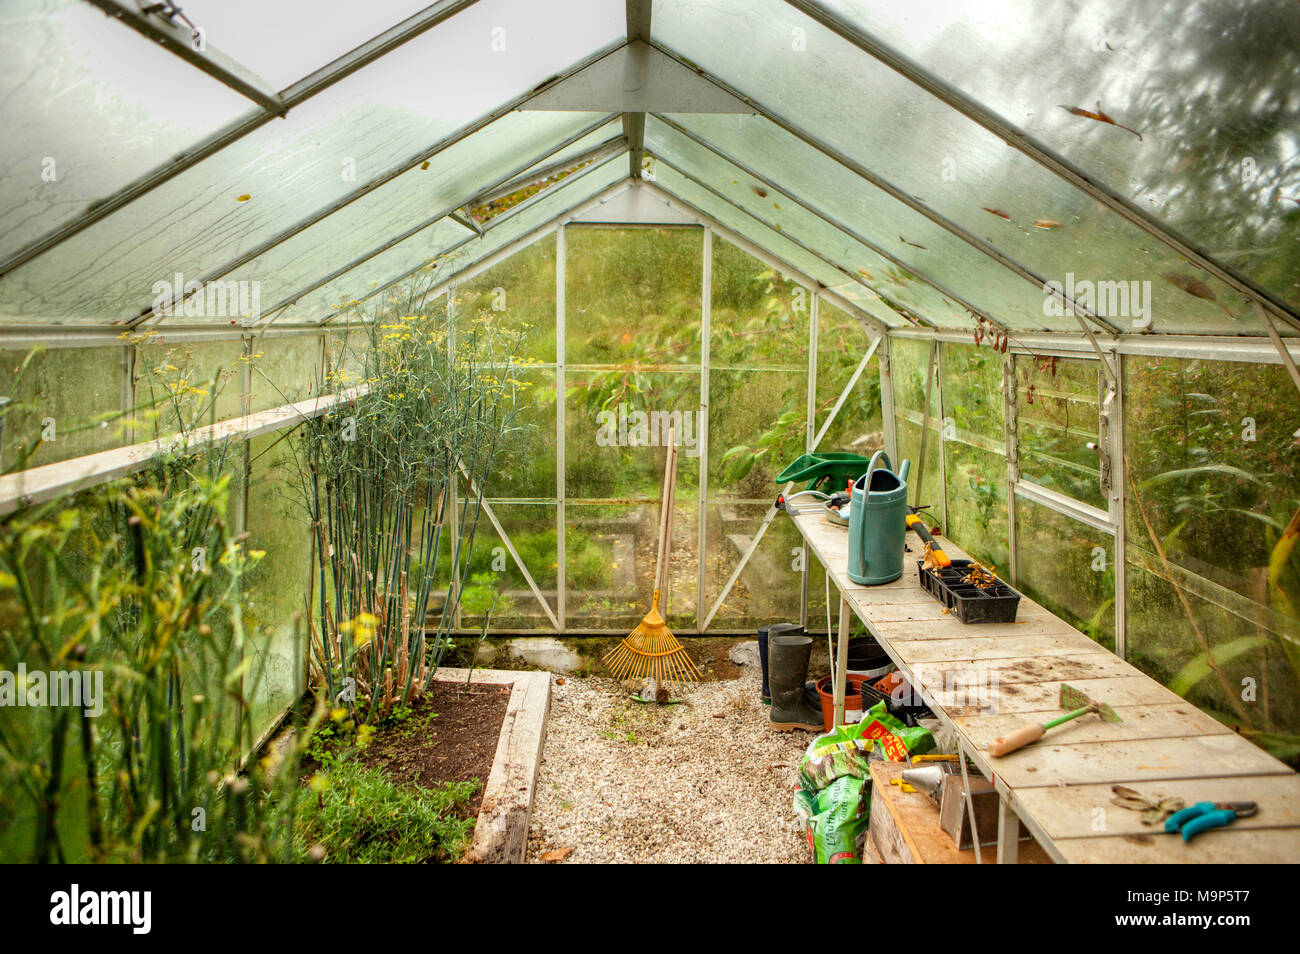 Green house at Domaine de Mero, Plonevez-du-Faou, Brittany, France Stock Photo